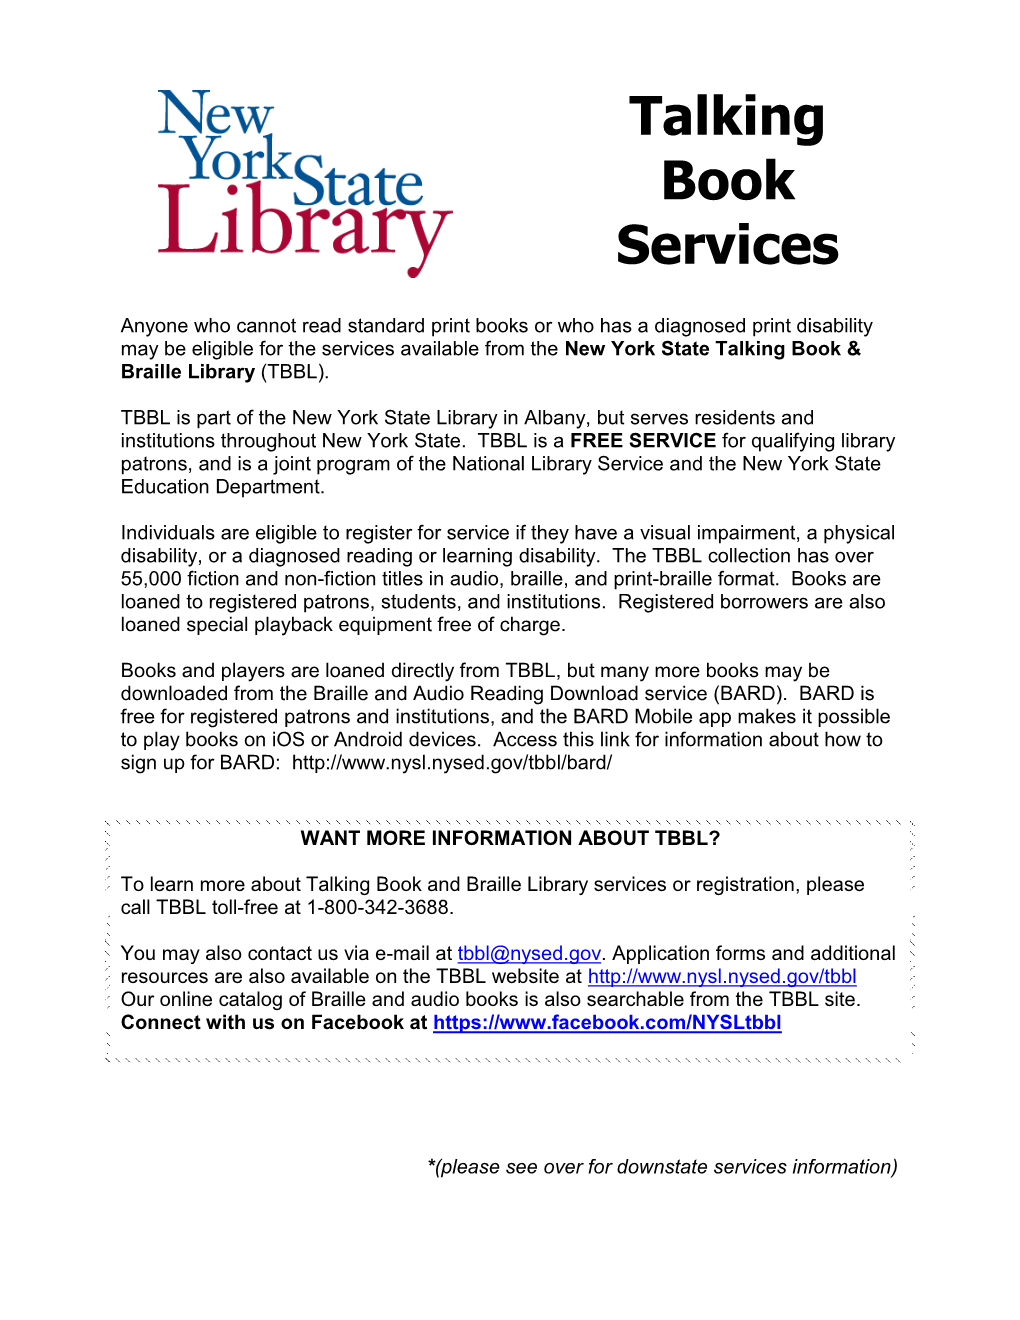 Fact Sheet on Talking Book Services